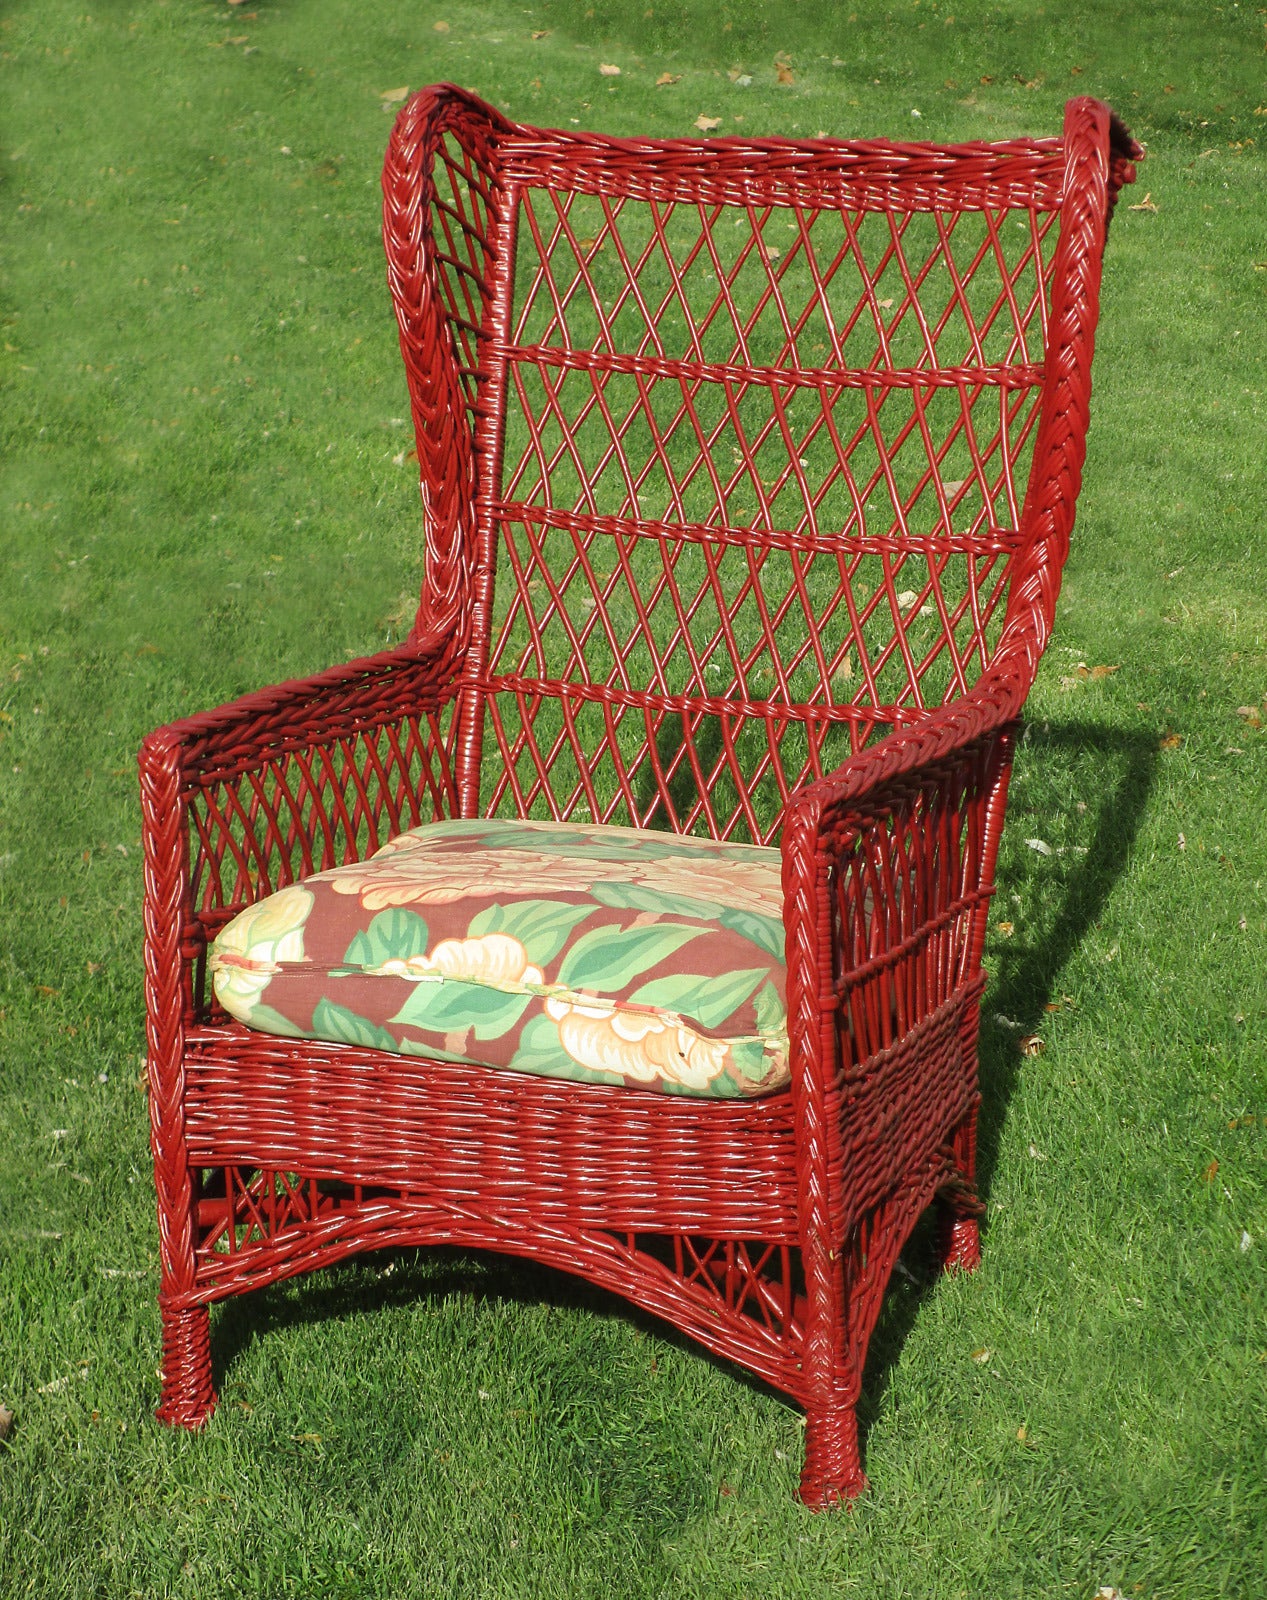 Bar Harbor wingback armchair in red painted finish. Criss-cross latticing overall. High level back, braided arms, and four pineapple feet.